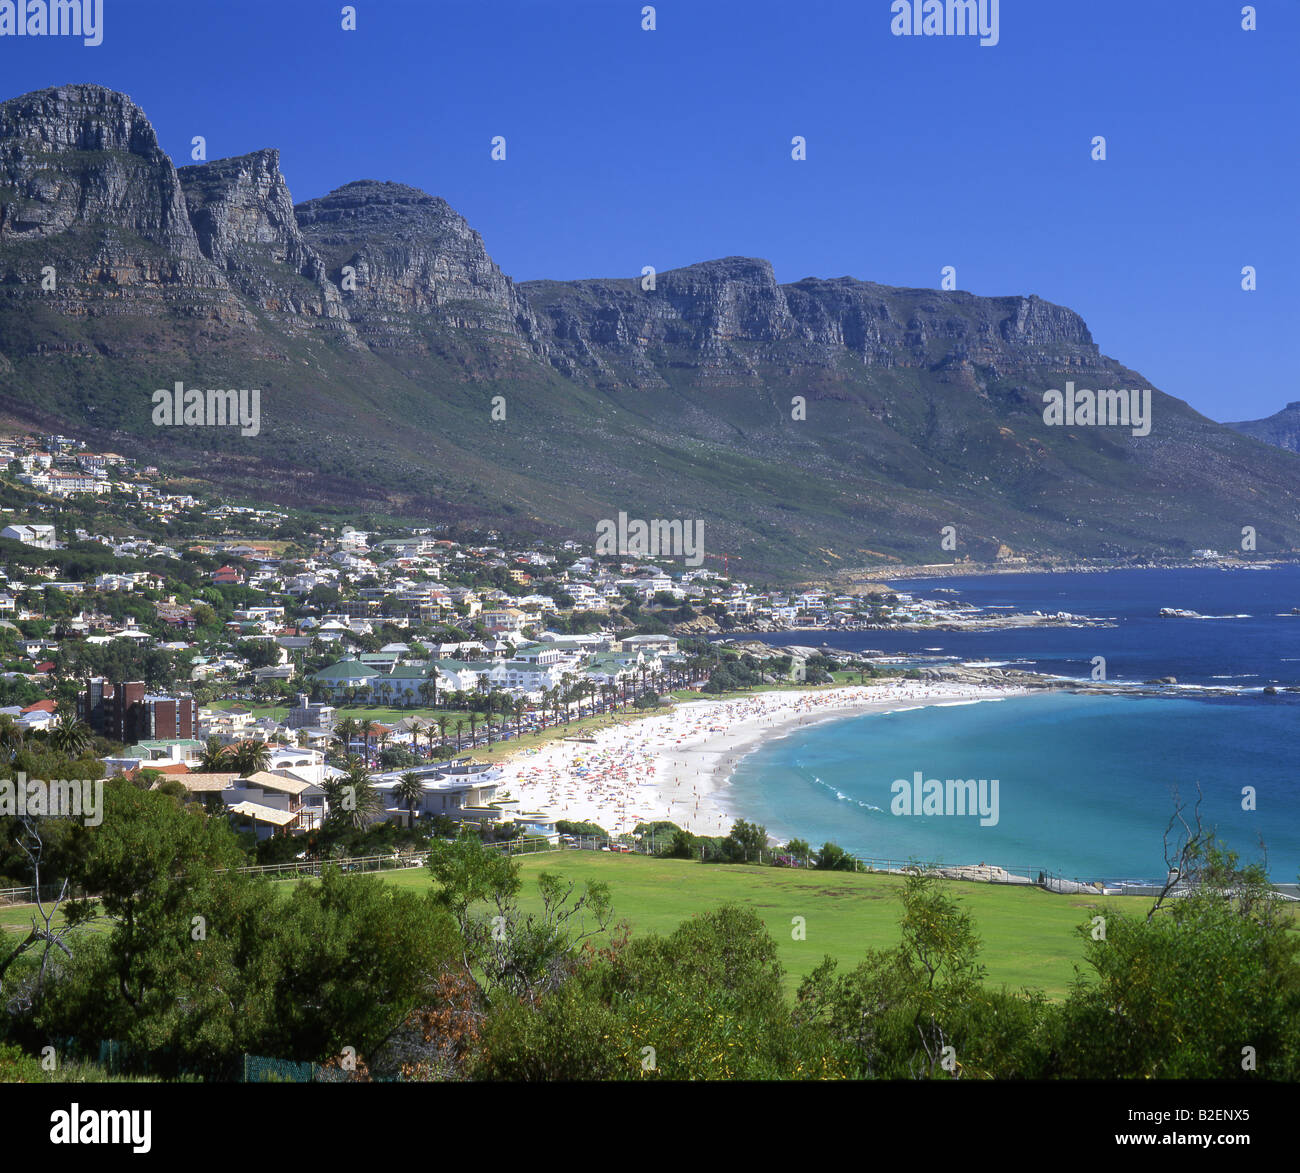 View over Campsbay residential area and beach with Twelve Apostles in the background Stock Photo